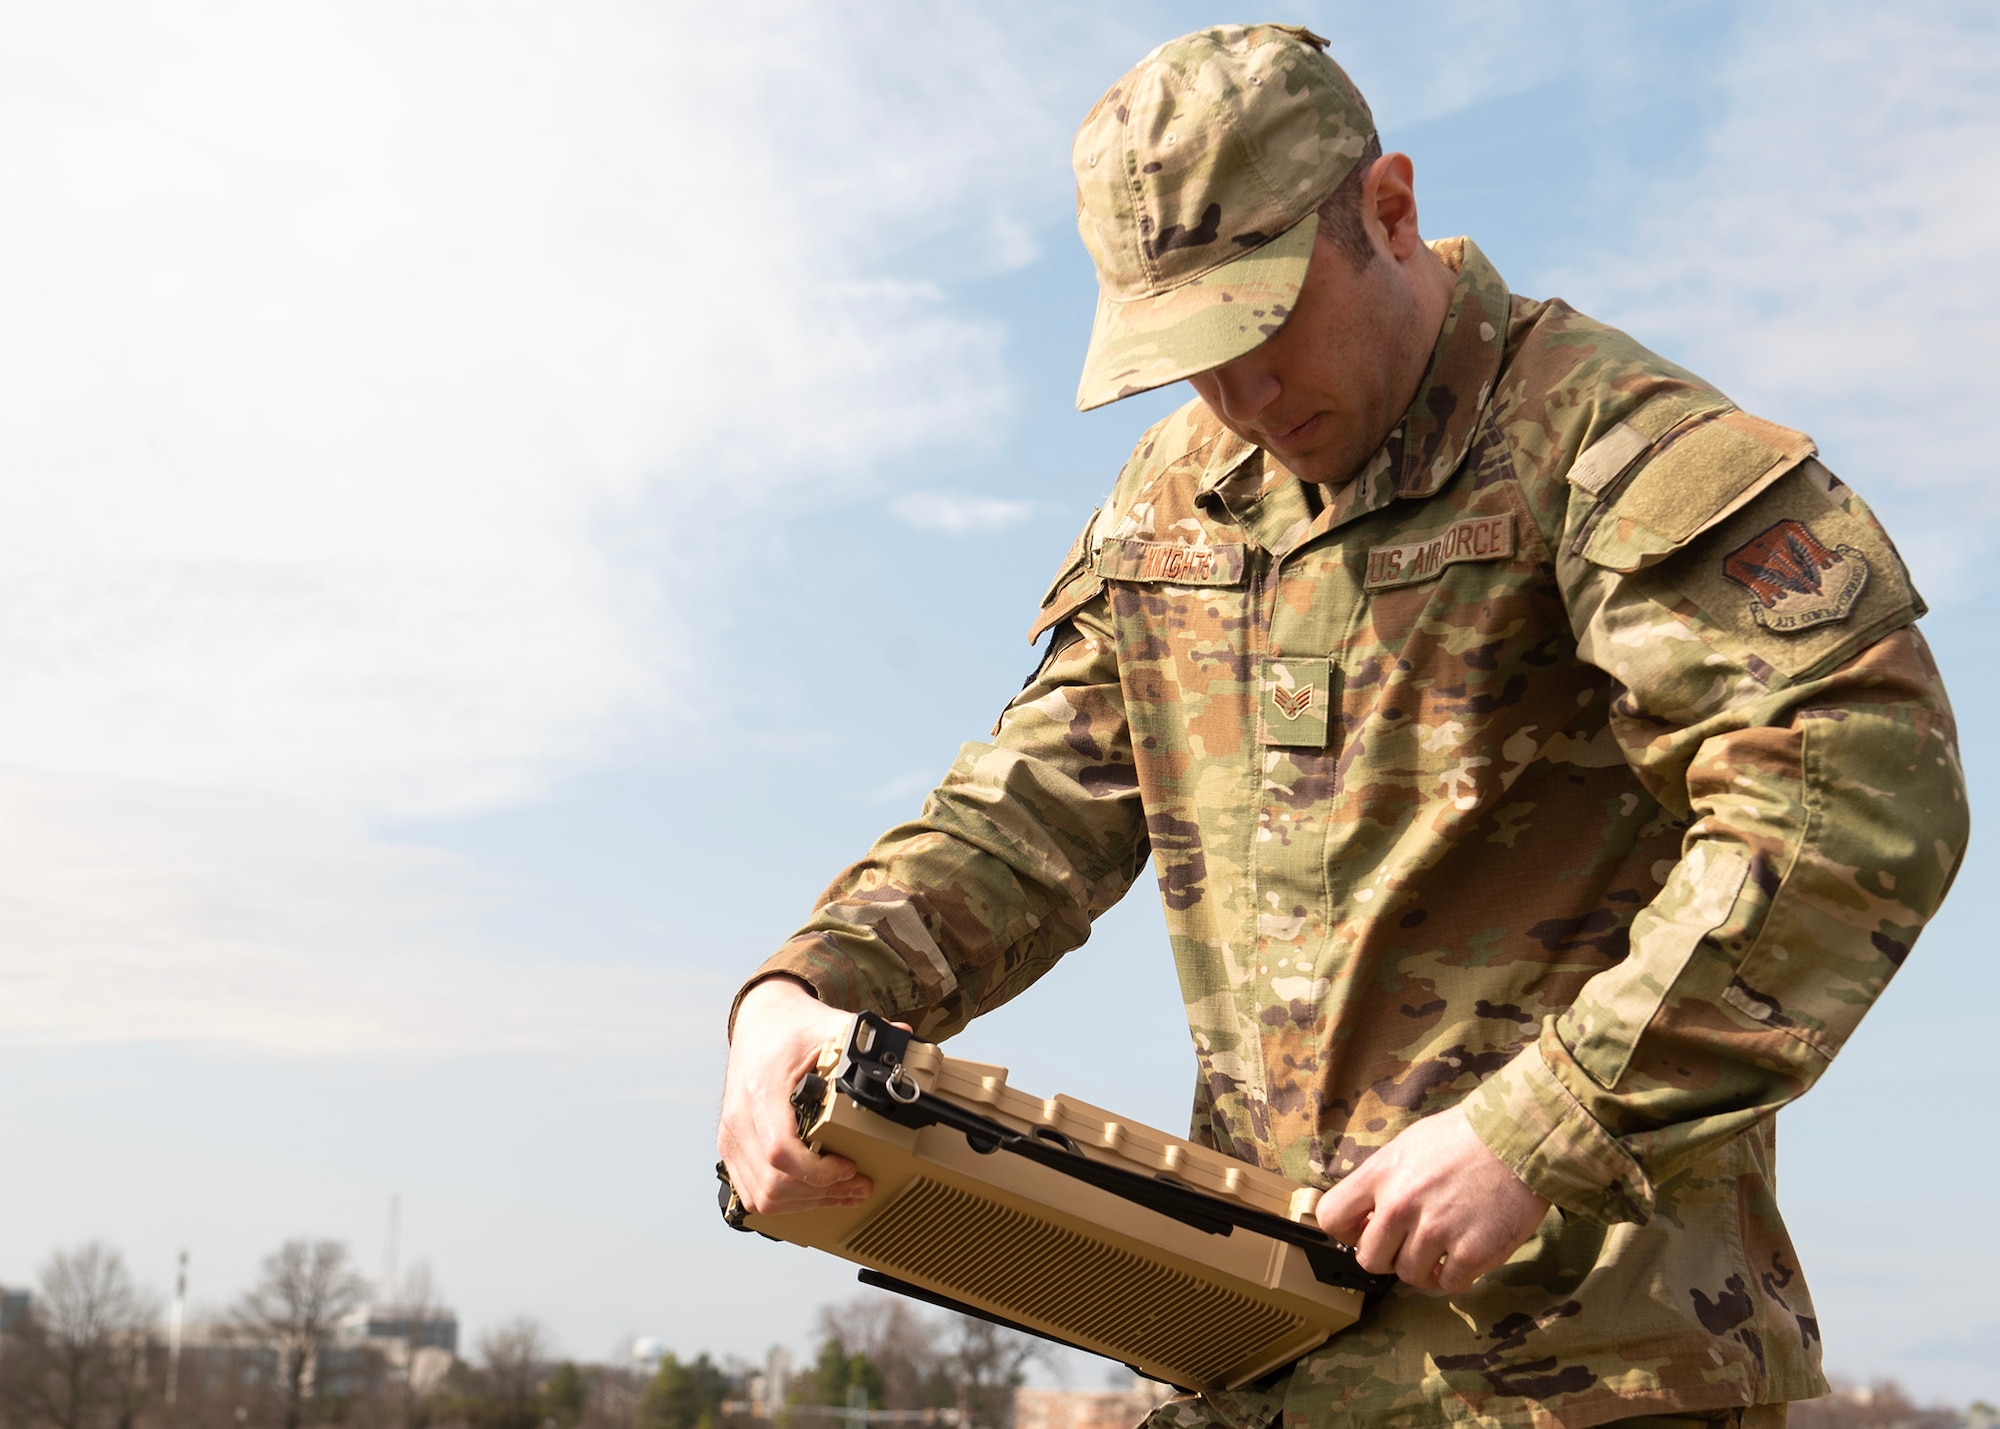 U.S. Air Force Senior Airman Kurtis Knights, 29th Intelligence Squadron target development network analyst, assembles a mobile radar, March 1, 2023, at Fort George G. Meade, Maryland. The radar is the second generation of its kind, providing mobile communications with an end-to-end connection worldwide. Intel Airmen tested the mobile equipment, to gain a better understanding of how to operate the device when used in austere environments. (U.S. Air Force phot by Staff Sgt. Kevin Iinuma)